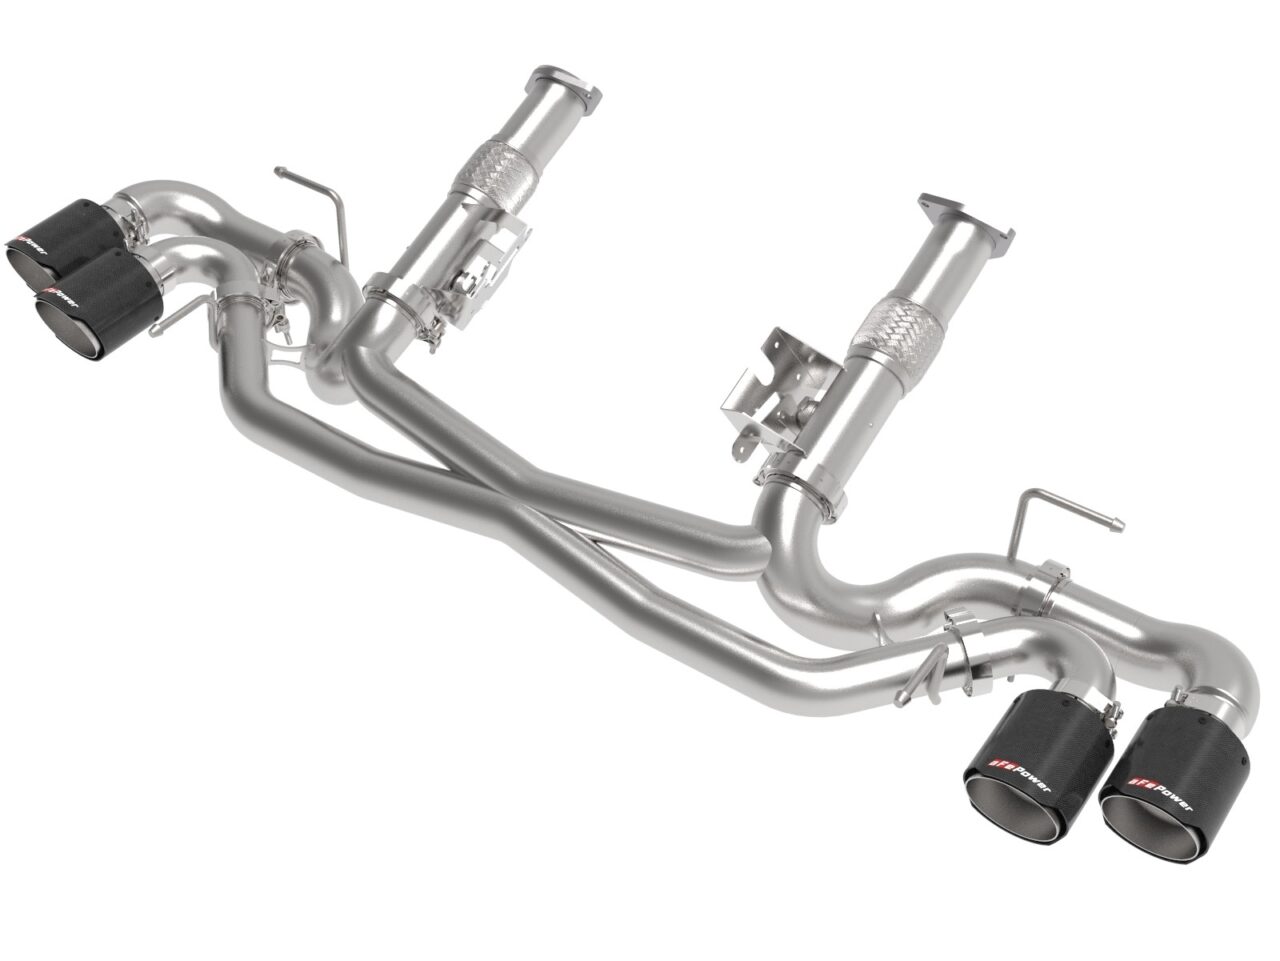 aFe POWER stainless steel exhaust system without muffler and with Carbon Fiber tips for 21-22 C8 Corvette on white background